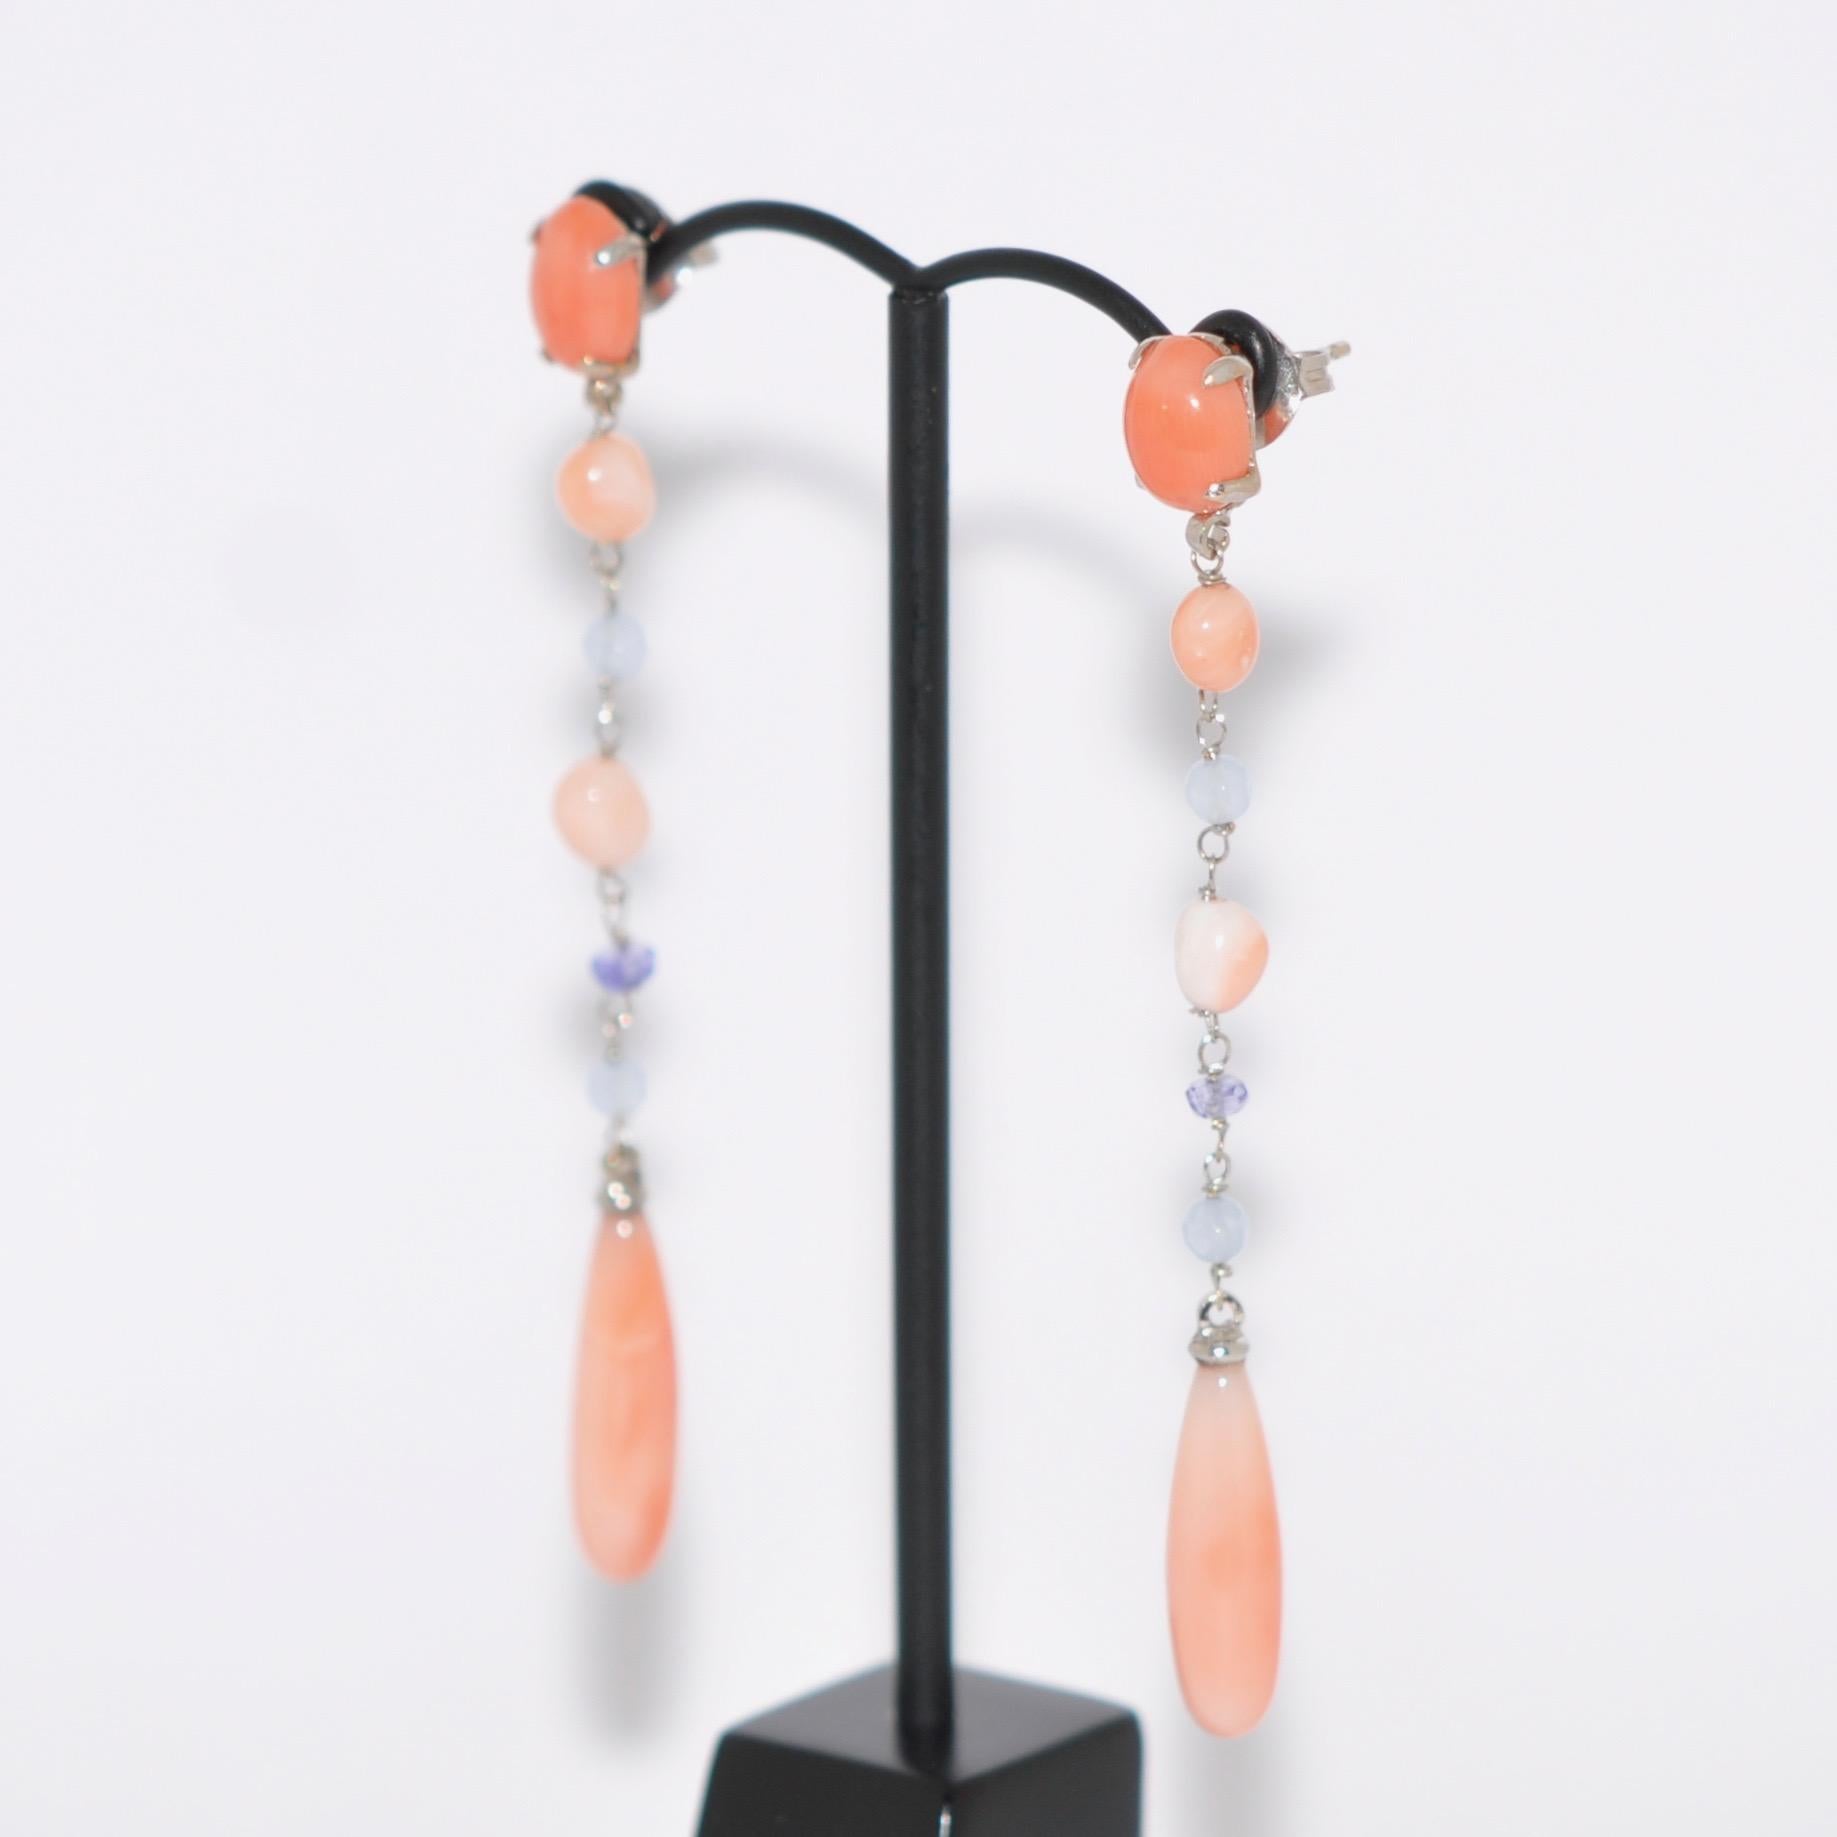 Discover this Coral and Chalcedony on White Gold 18 Karat Chandelier Earrings.
Coral
Chalcedony
White Gold 18K
